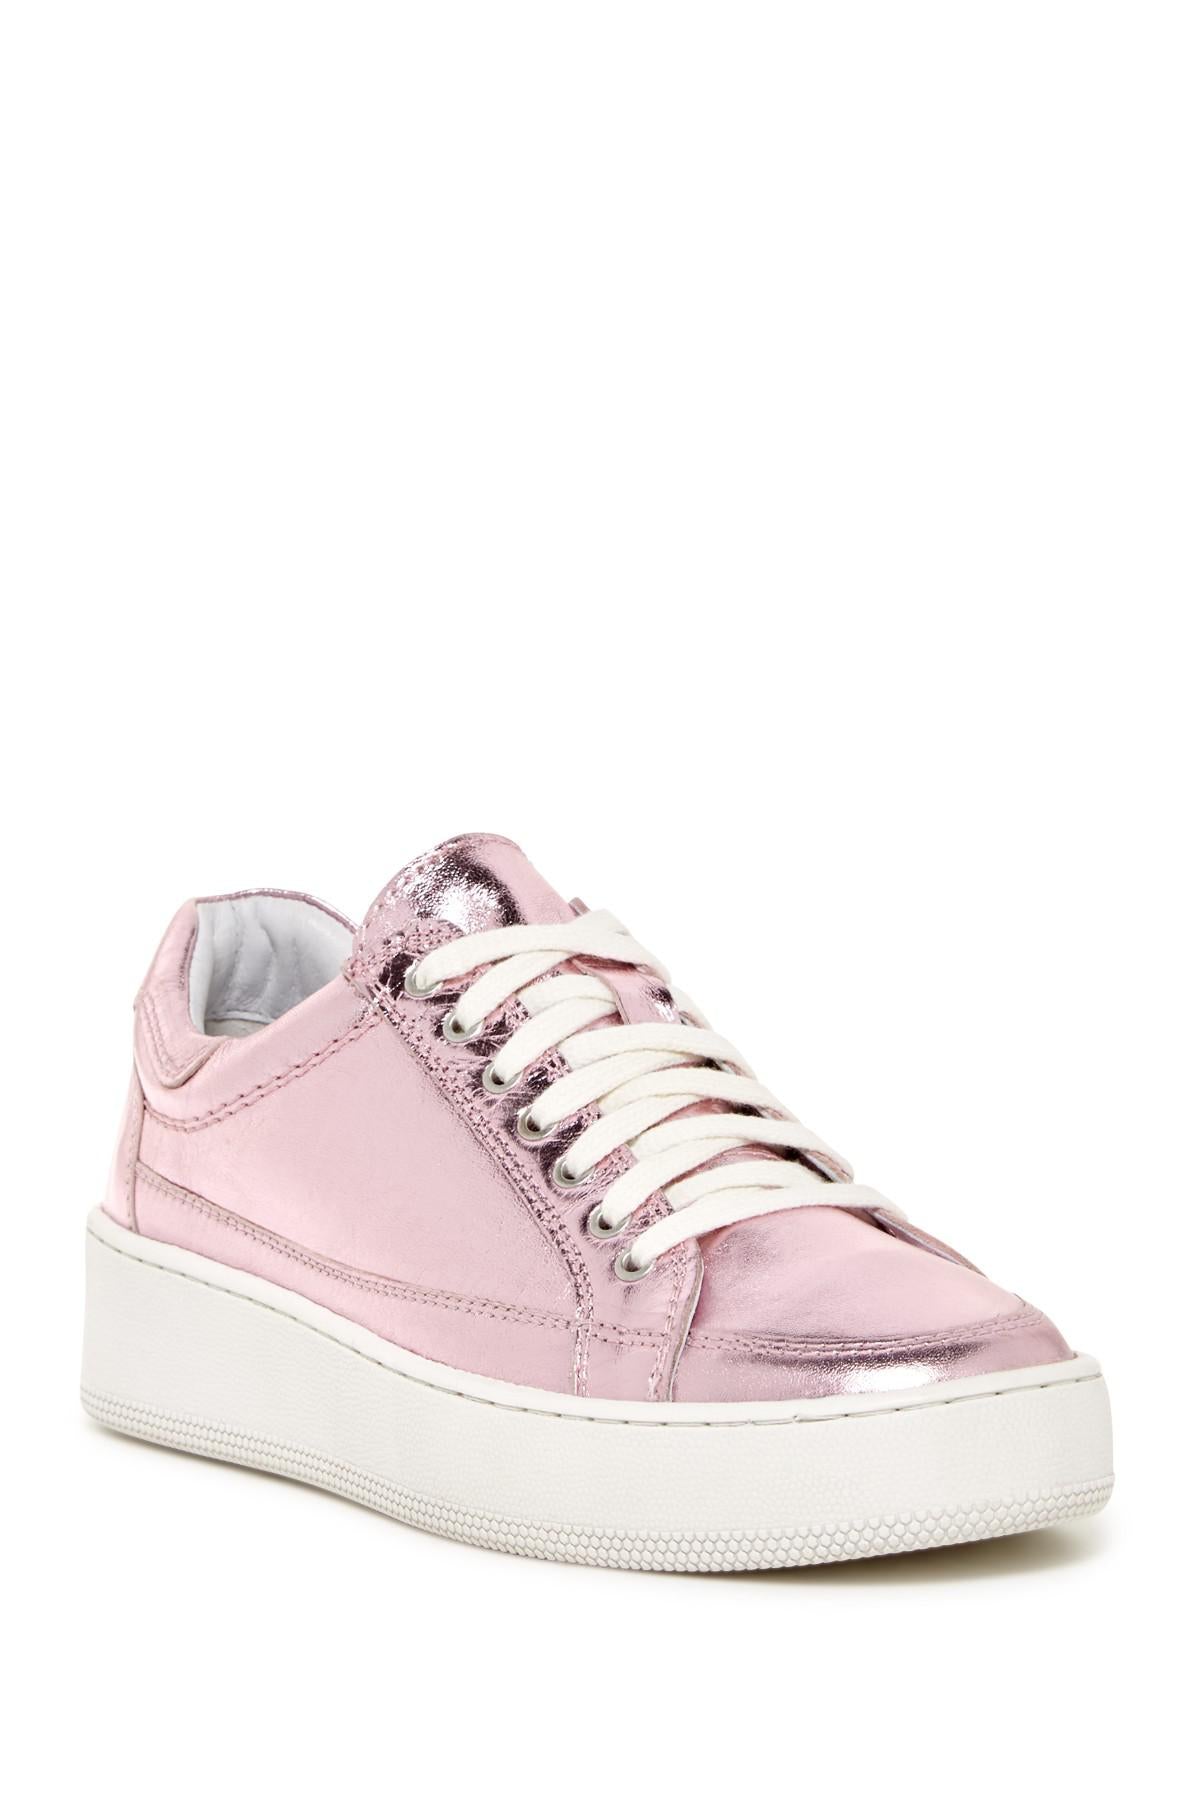 Free People Letterman Metallic Sneakers – Pit-a-Pats.com